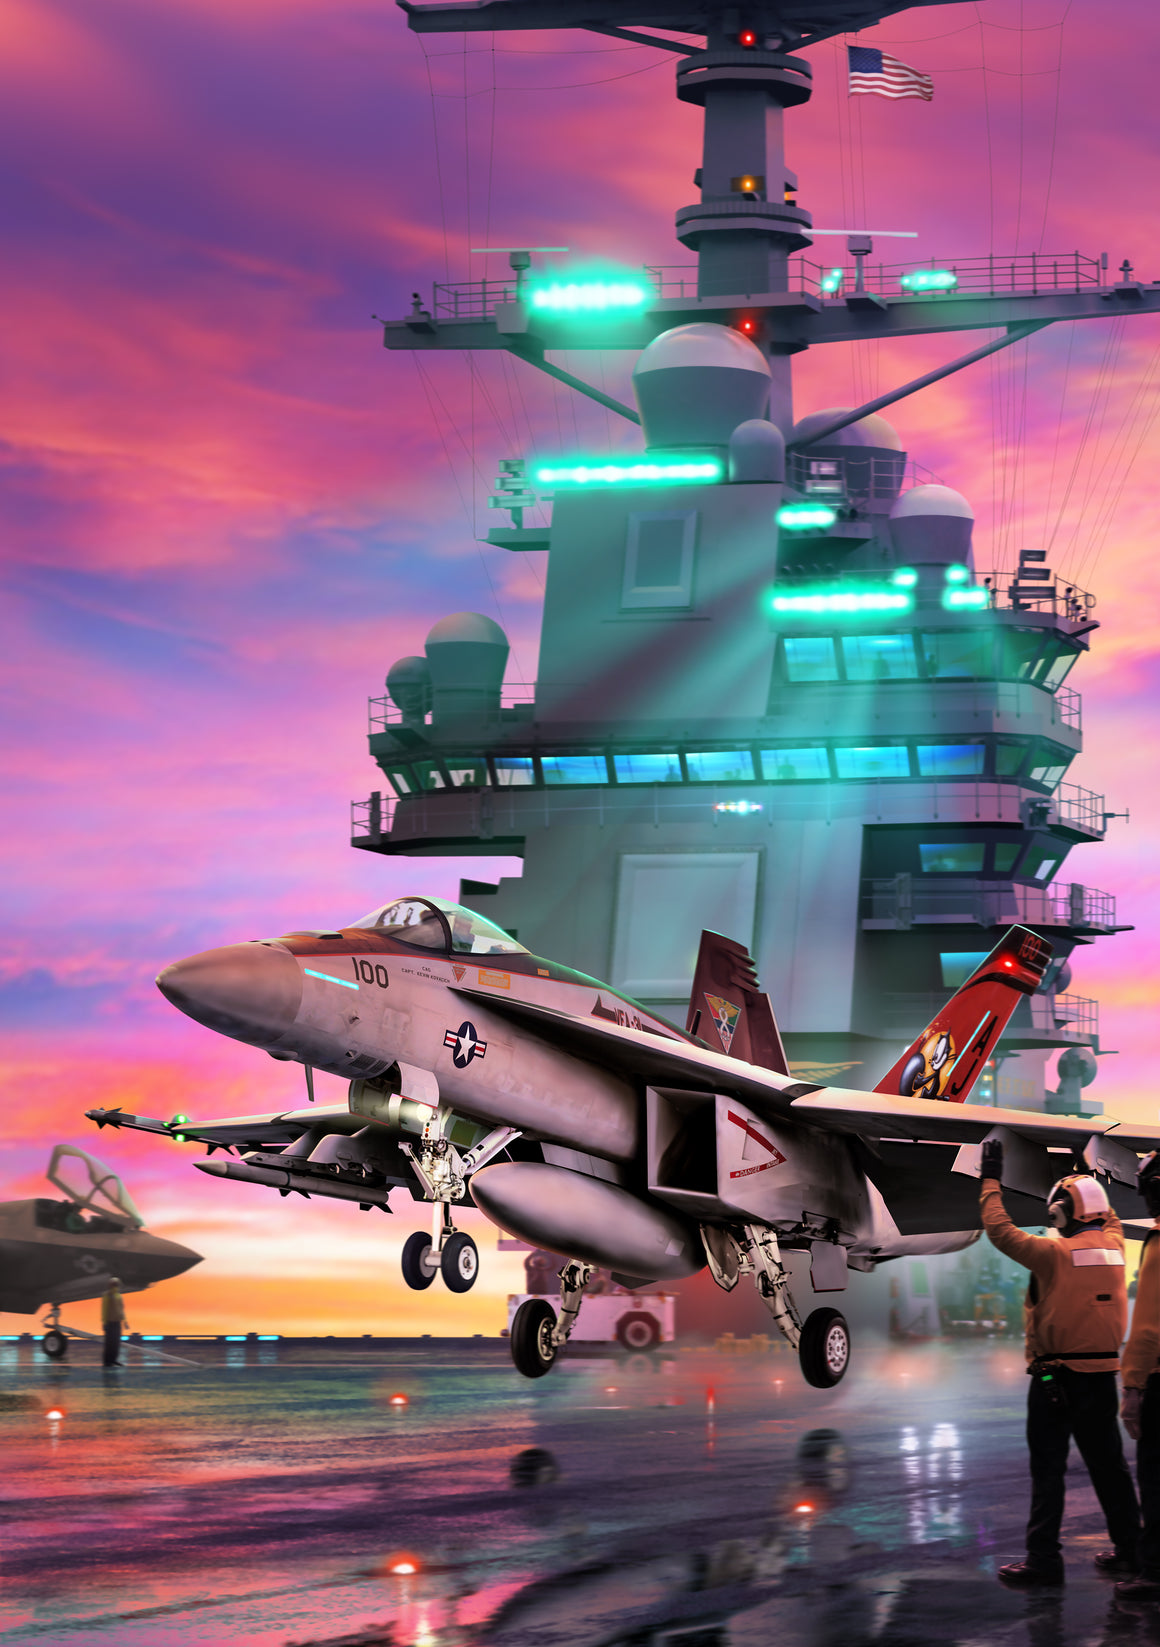 F/A-18E Super Hornet of VFA 31 on the USS Gerald R. Ford, by Ron Cole